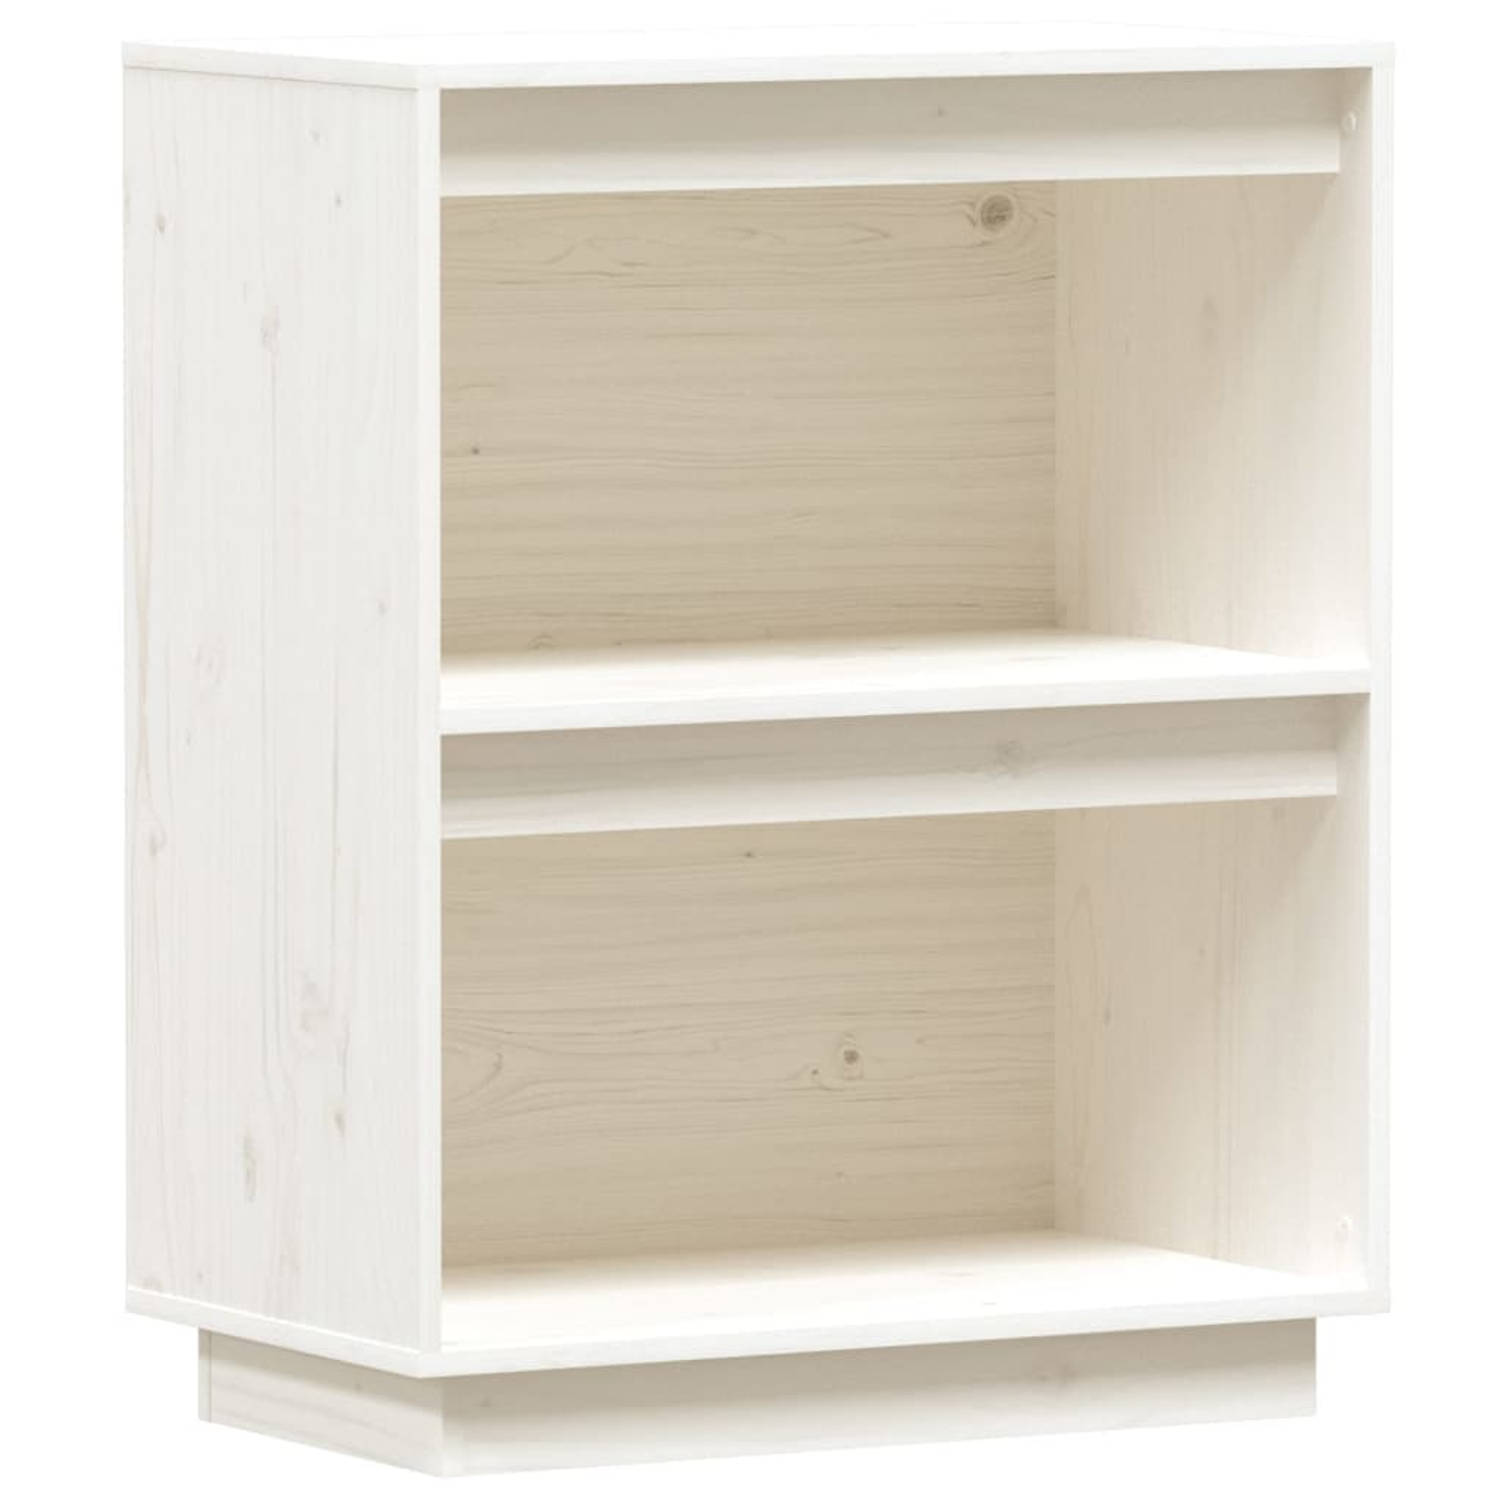 The Living Store Wandkast Hout - 60 x 34 x 75 cm - Massief grenenhout - Wit